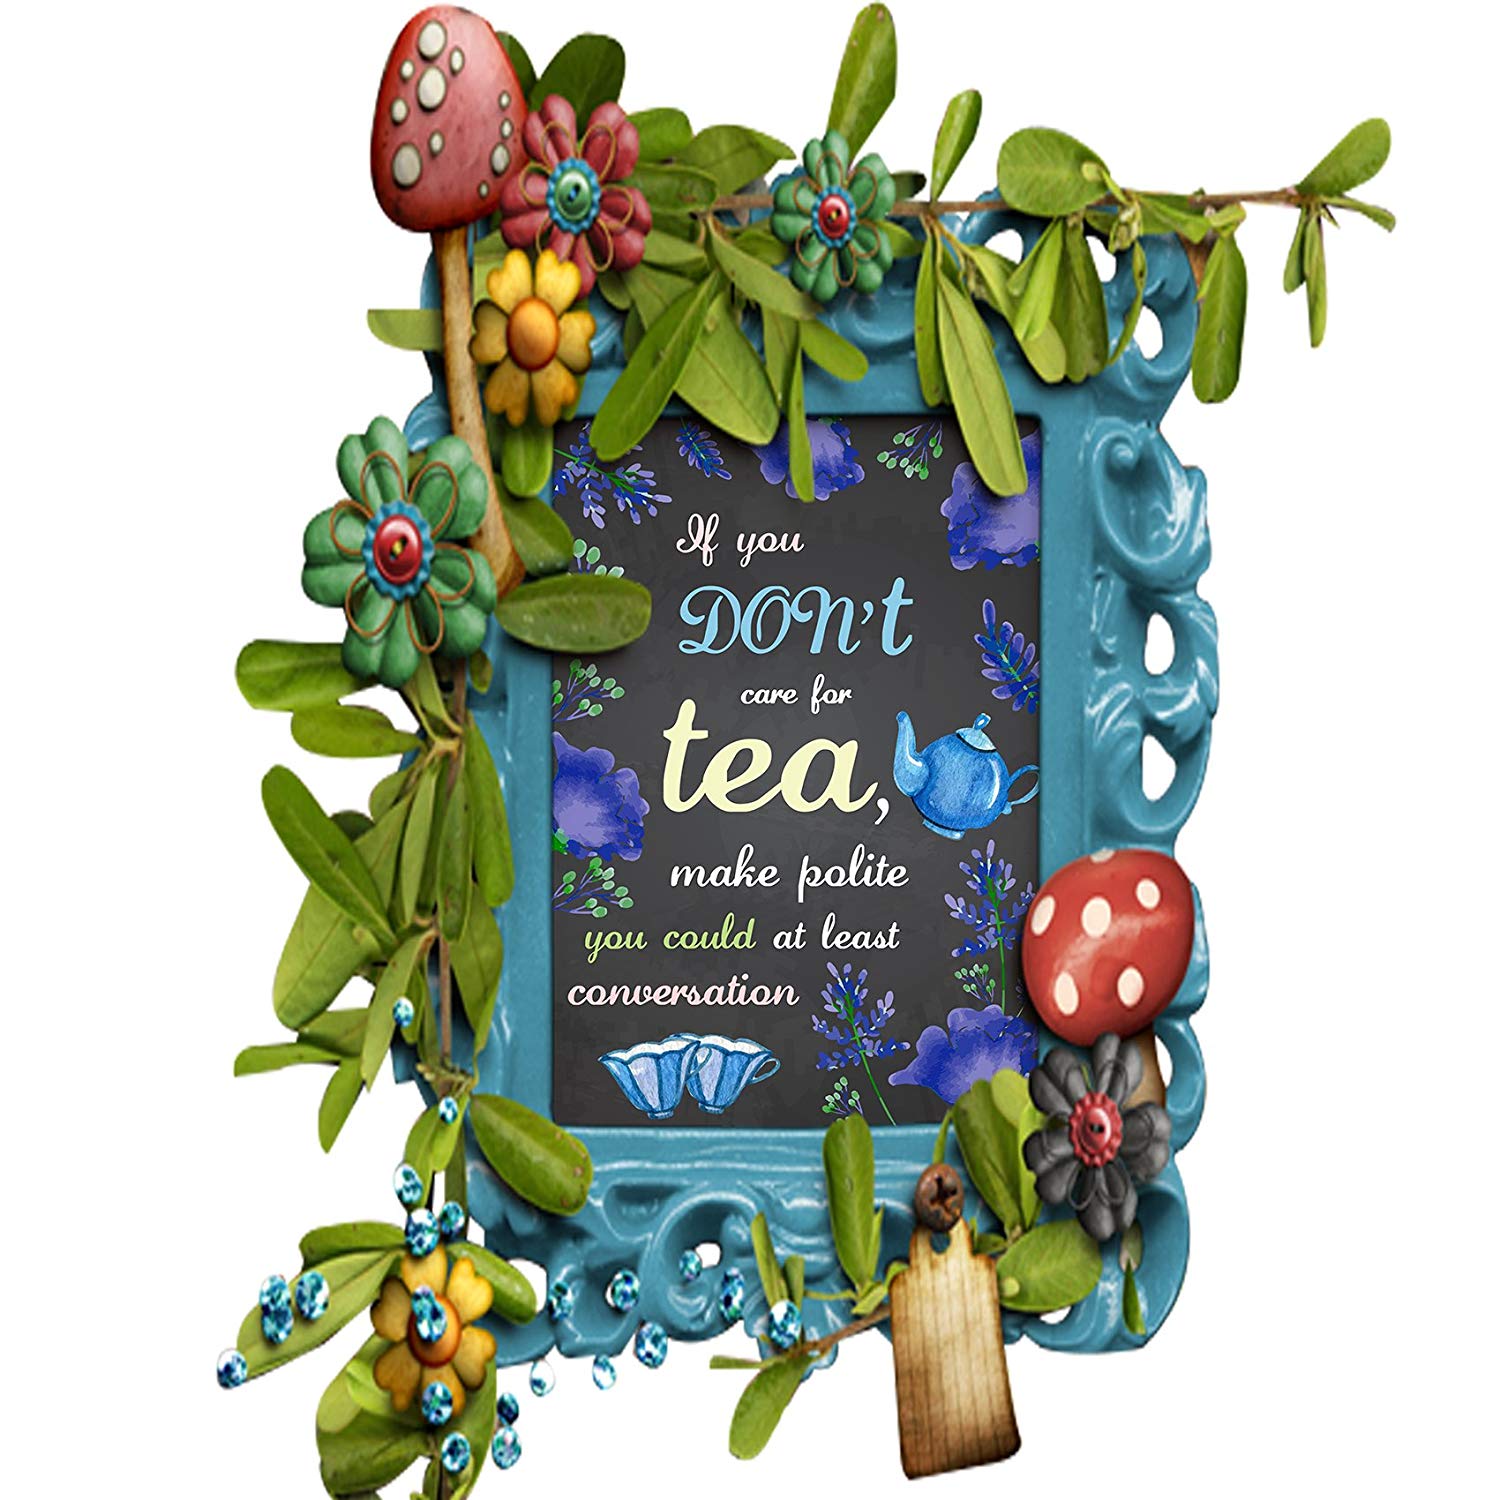 Wonderland Mad Tea Party Poster Photo Booth Props Sign A3 16x12inch